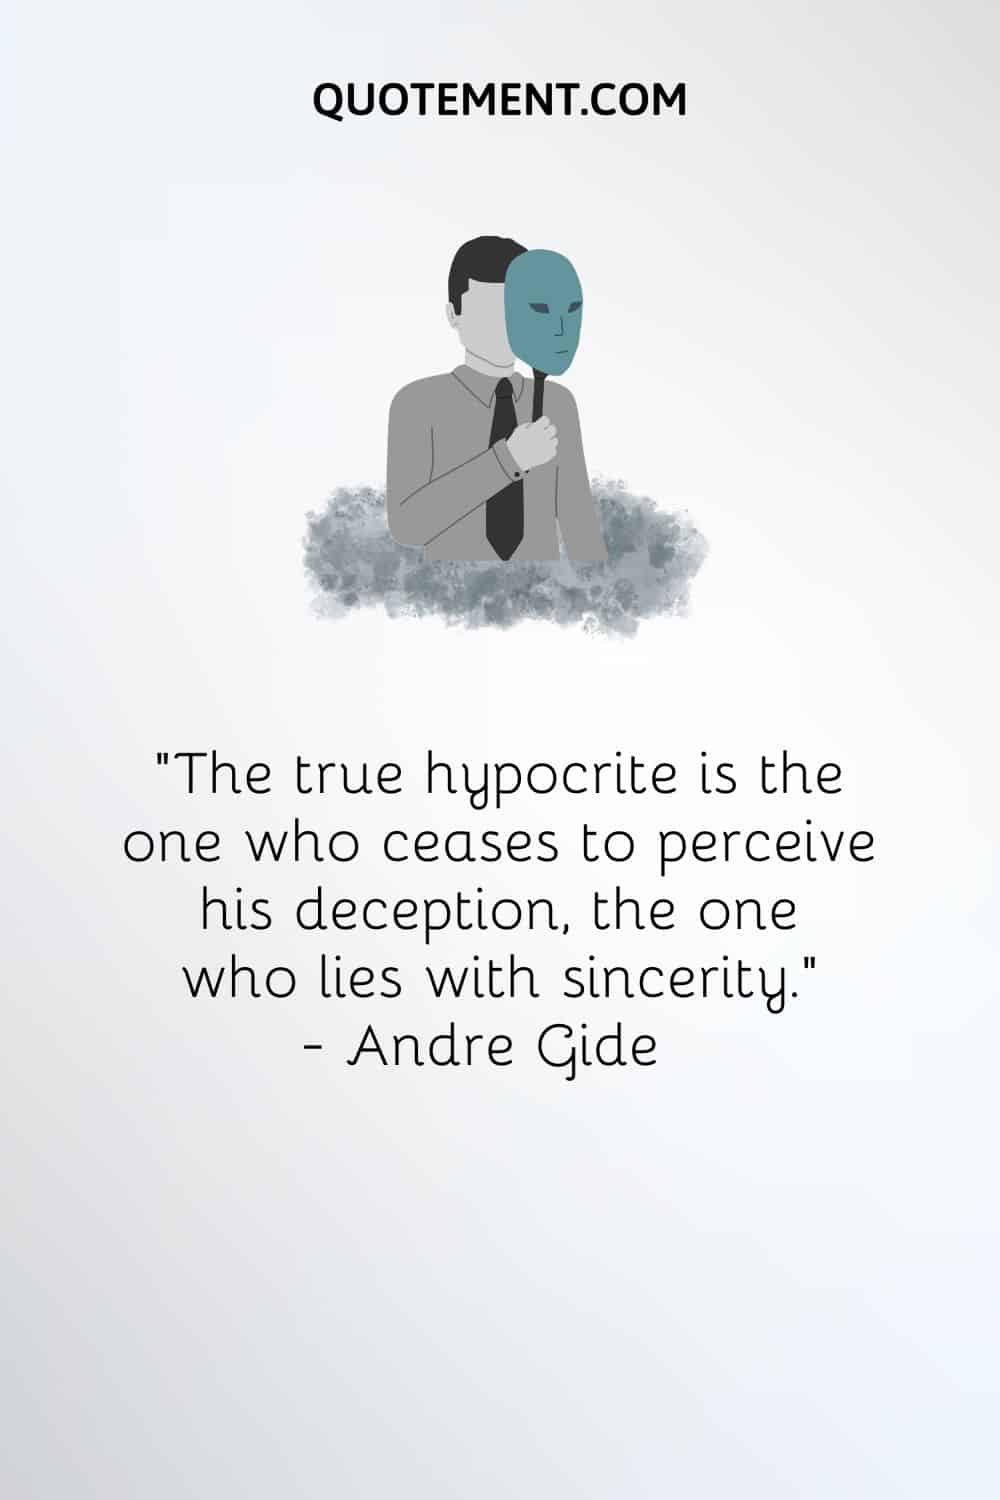 “The true hypocrite is the one who ceases to perceive his deception, the one who lies with sincerity.” — Andre Gide